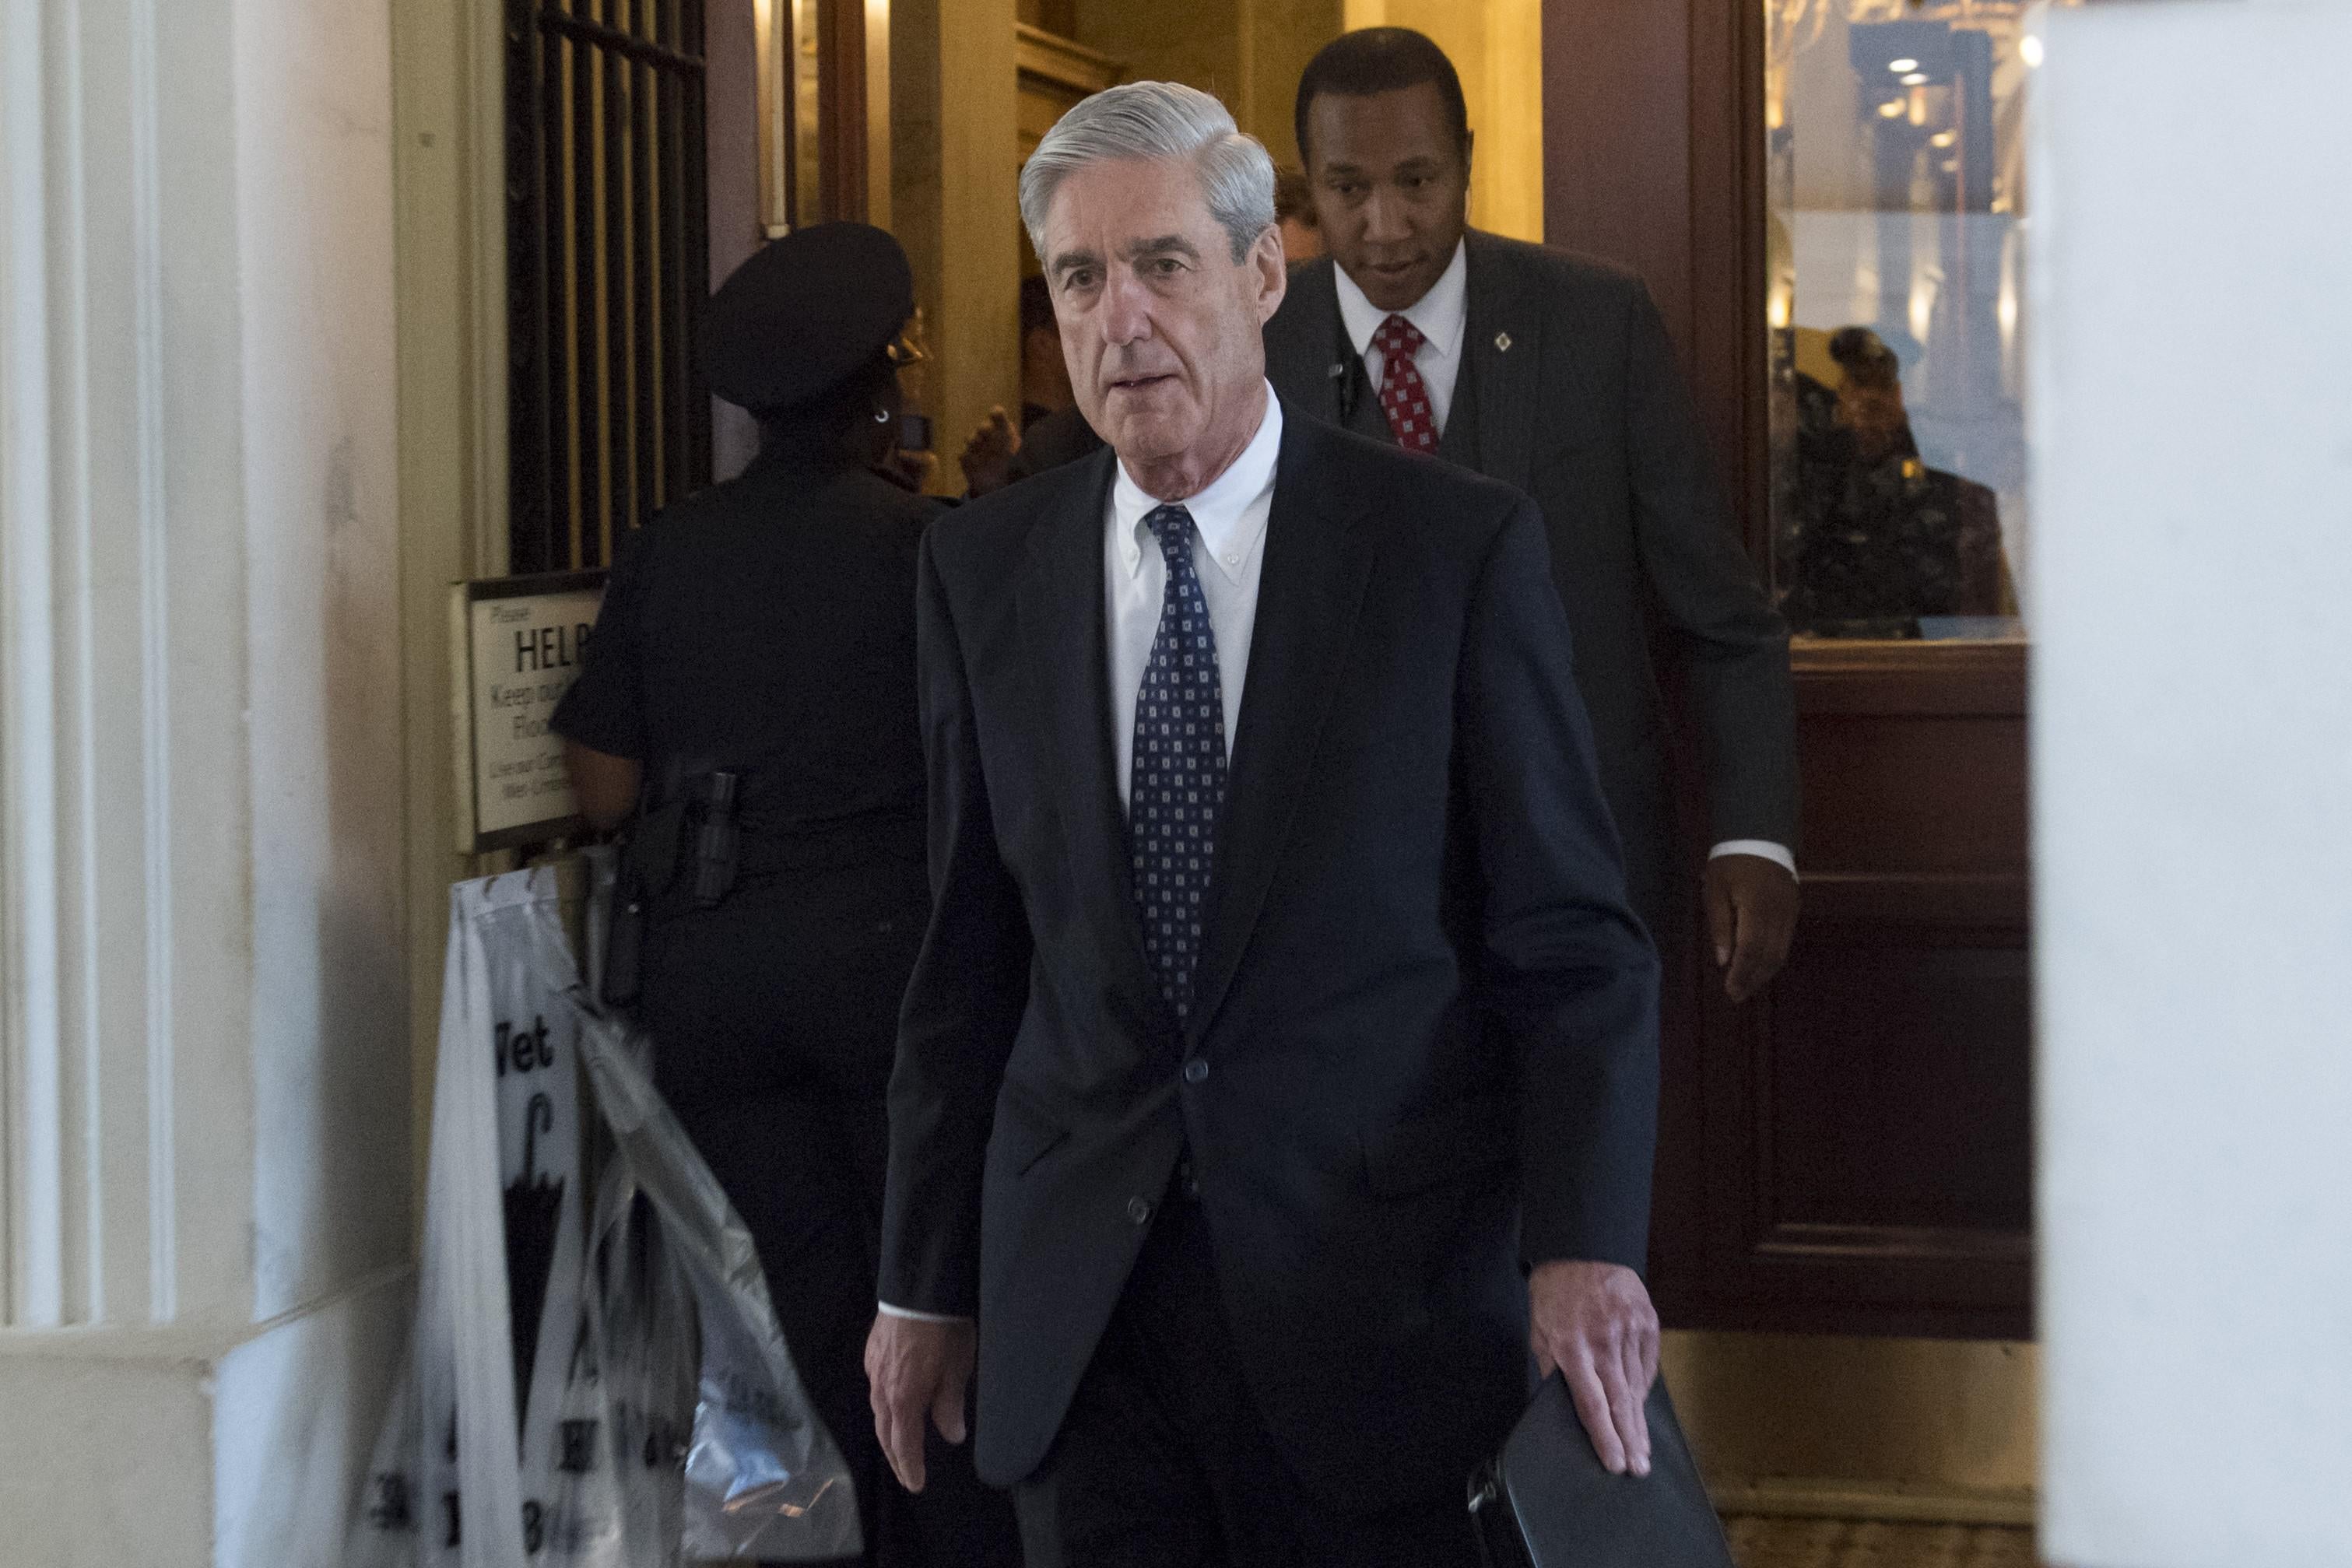 Former FBI Director Robert Mueller, special counsel on the Russian investigation, leaves following a meeting with members of the US Senate Judiciary Committee at the US Capitol in Washington, DC on June 21, 2017. / AFP PHOTO / SAUL LOEB        (Photo credit should read SAUL LOEB/AFP/Getty Images)